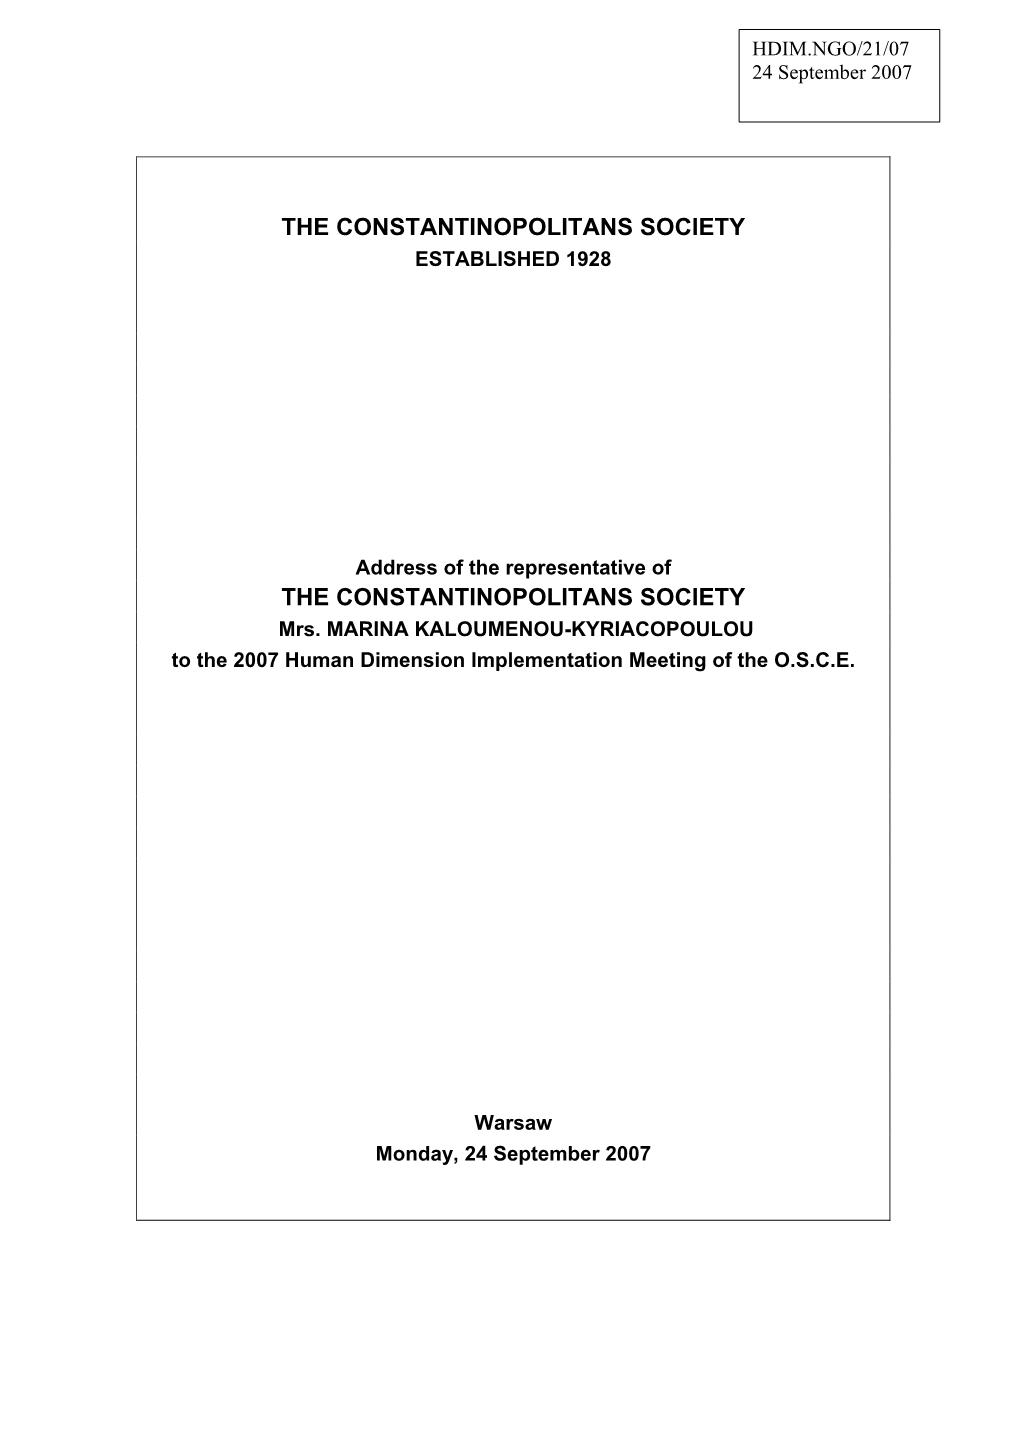 Address of the Representative of the ASSOCIATION OF